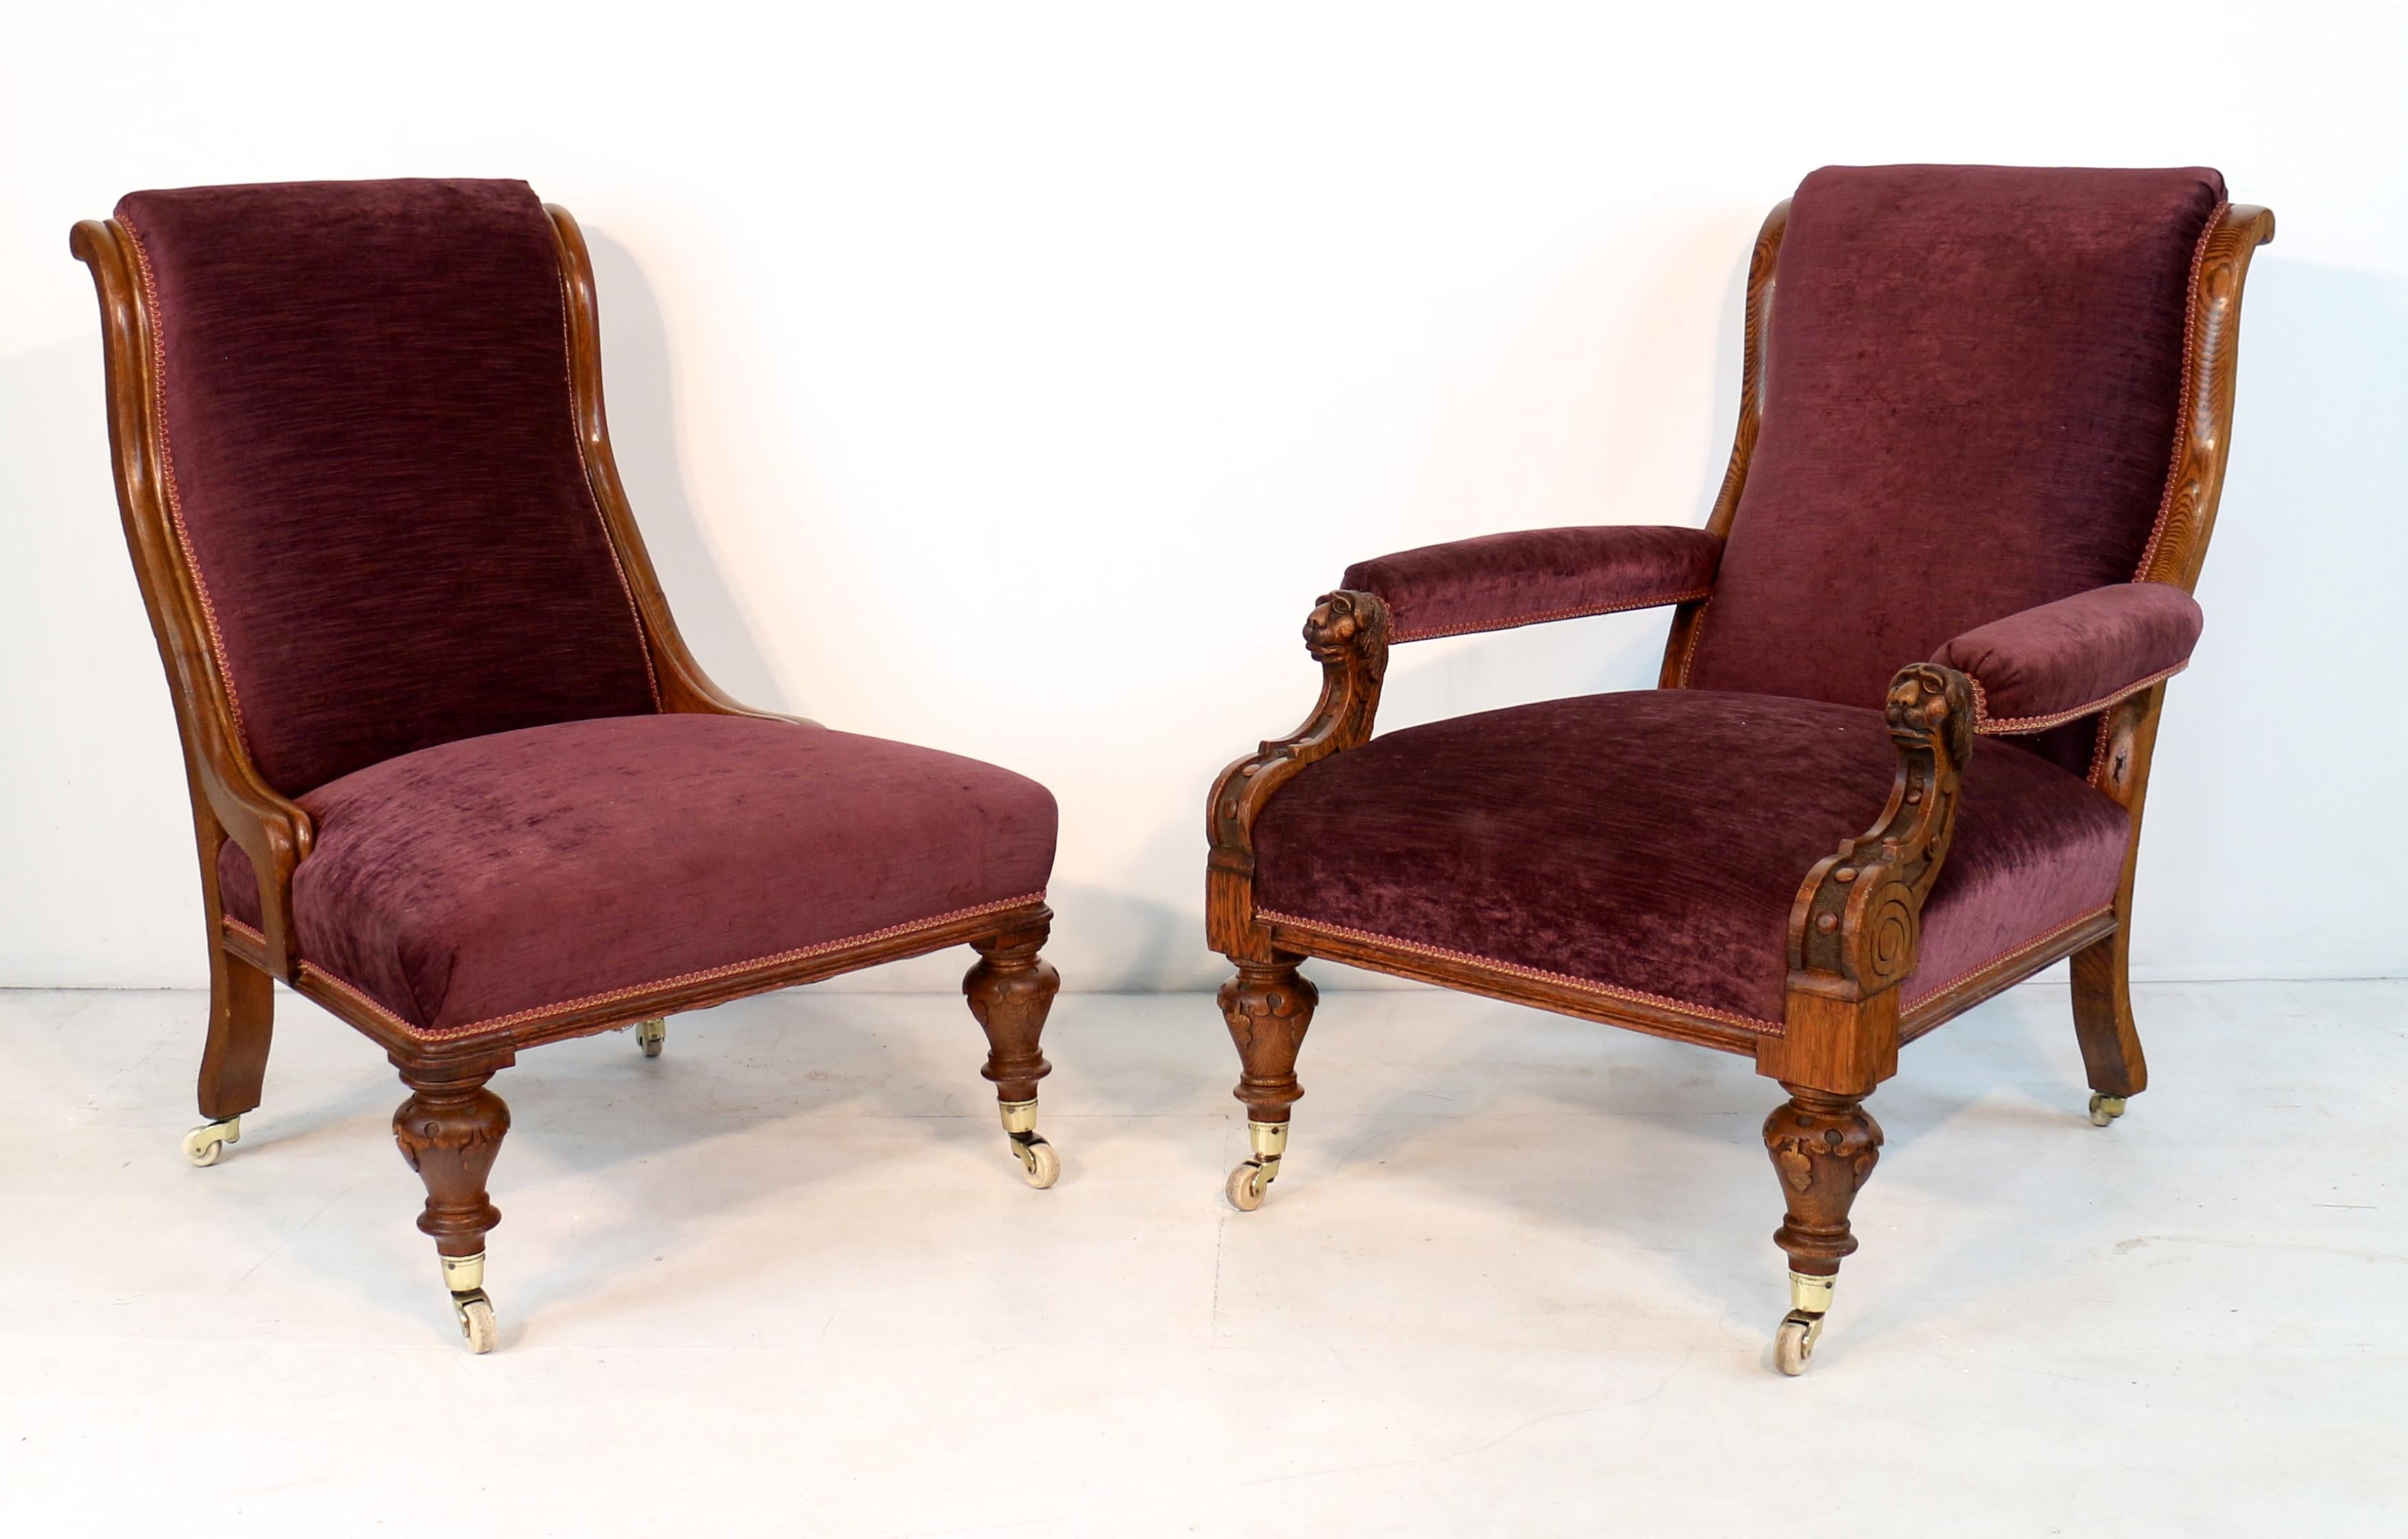 A superb pair of Victorian his and hers library chairs, circa 1870, the gentleman’s armchair with carved lion head terminals to the padded armrests, each with shaped back and deep seat and recently reupholstered in aubergine purple velvet chenille